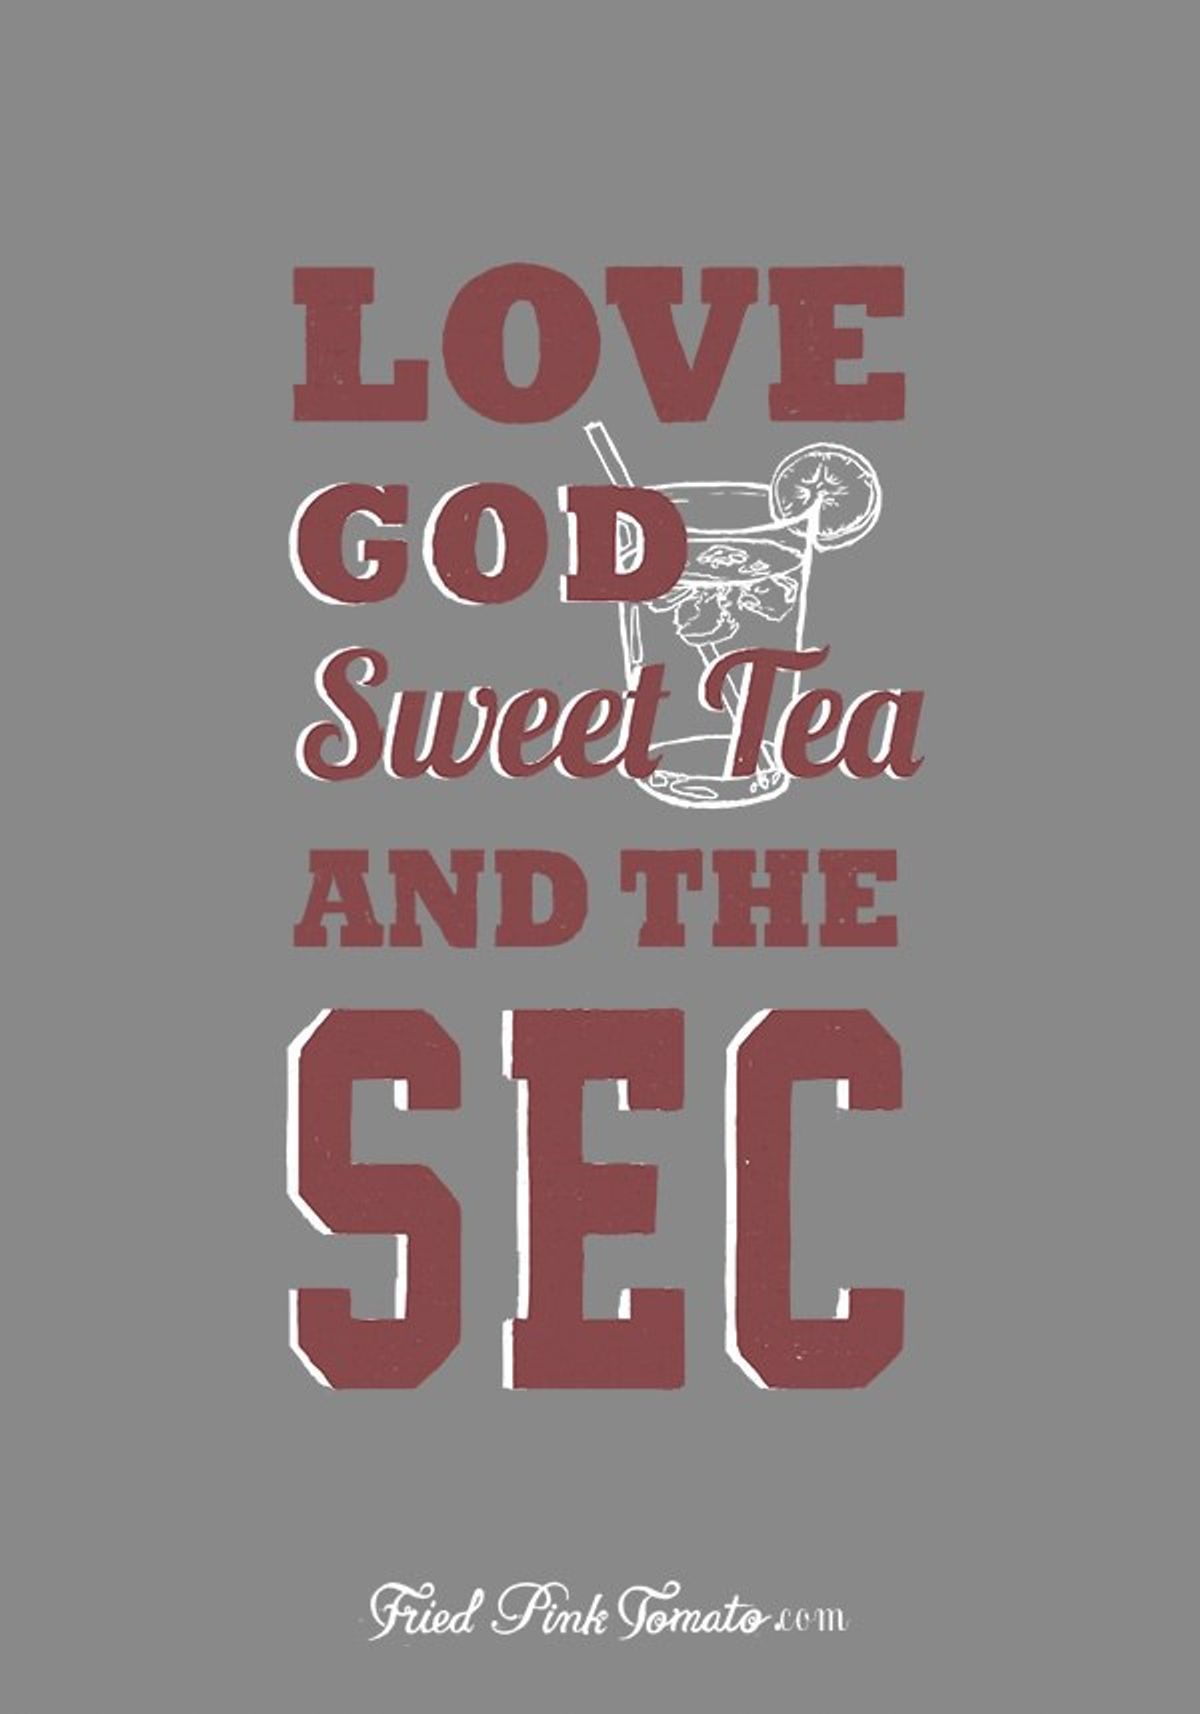 To The Woman Who Slut Shamed The SEC